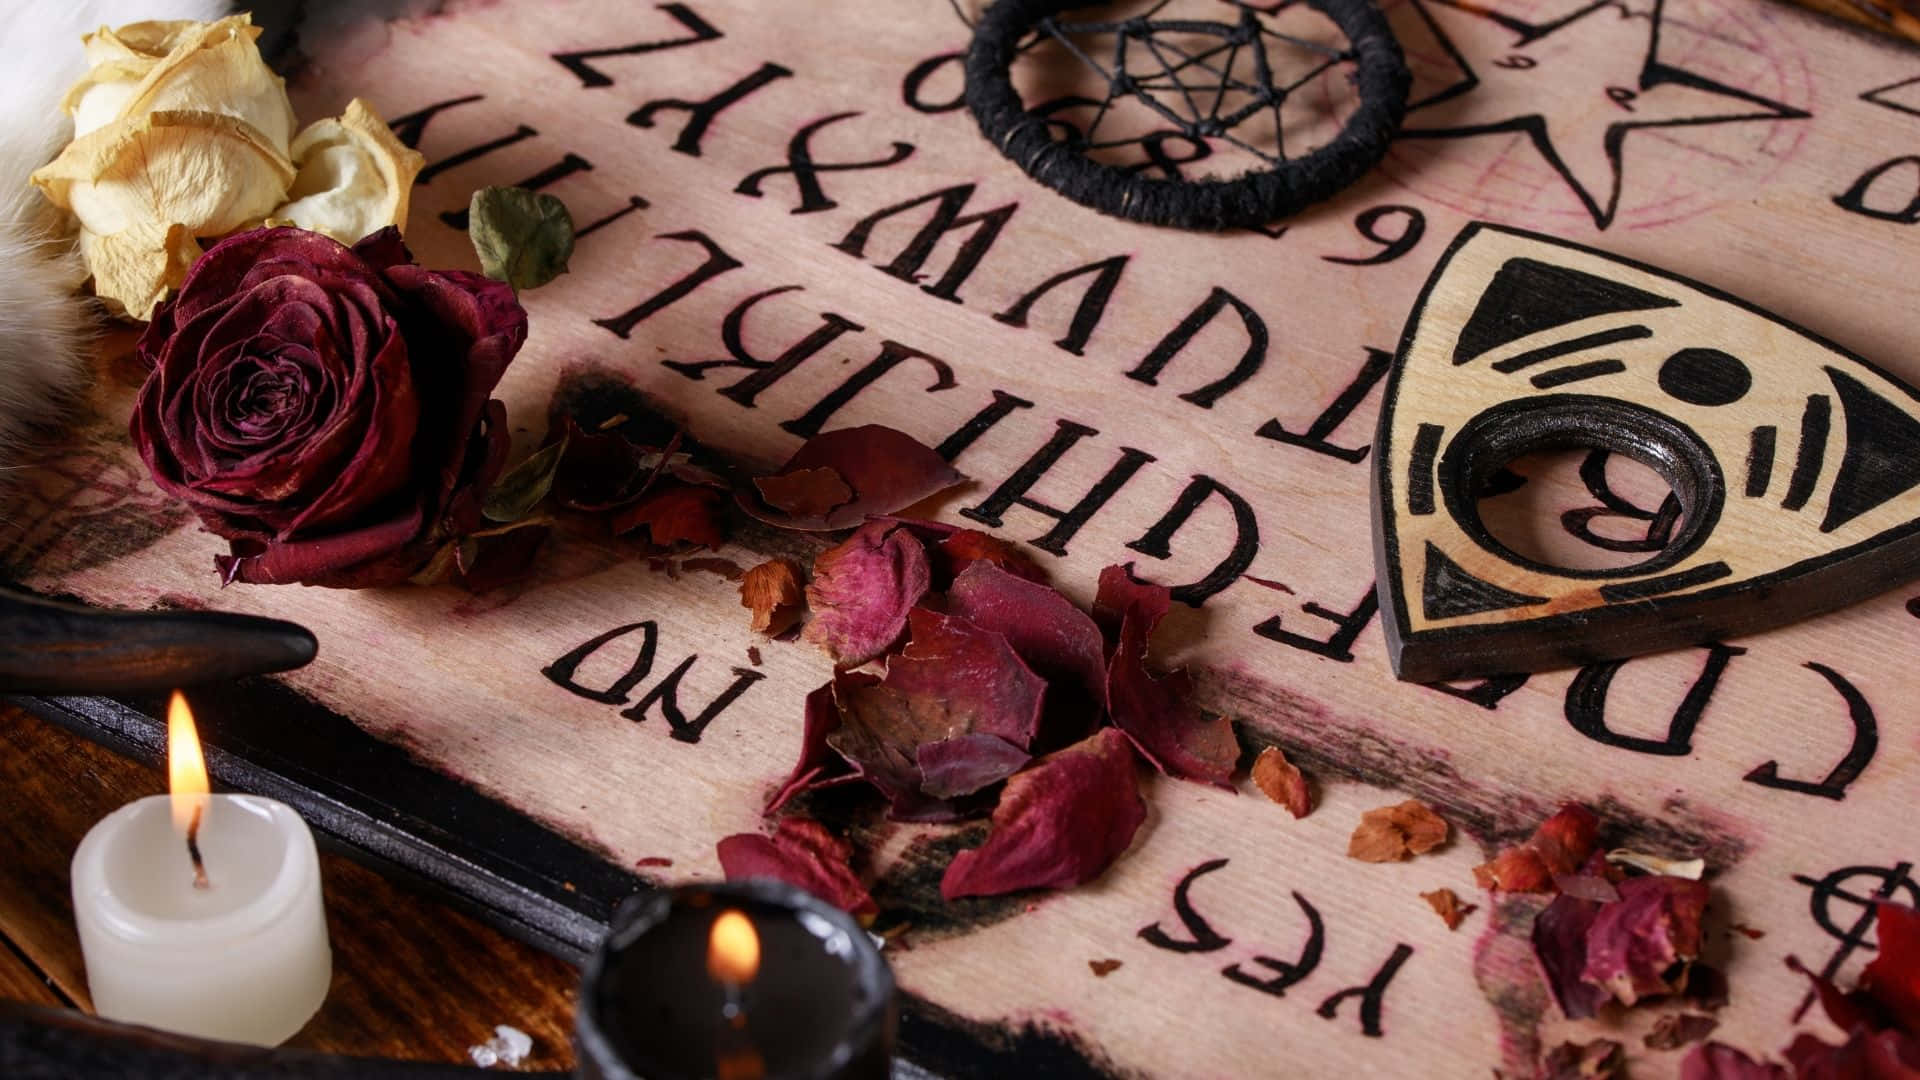 Have a spooky experience with an Ouija board Wallpaper